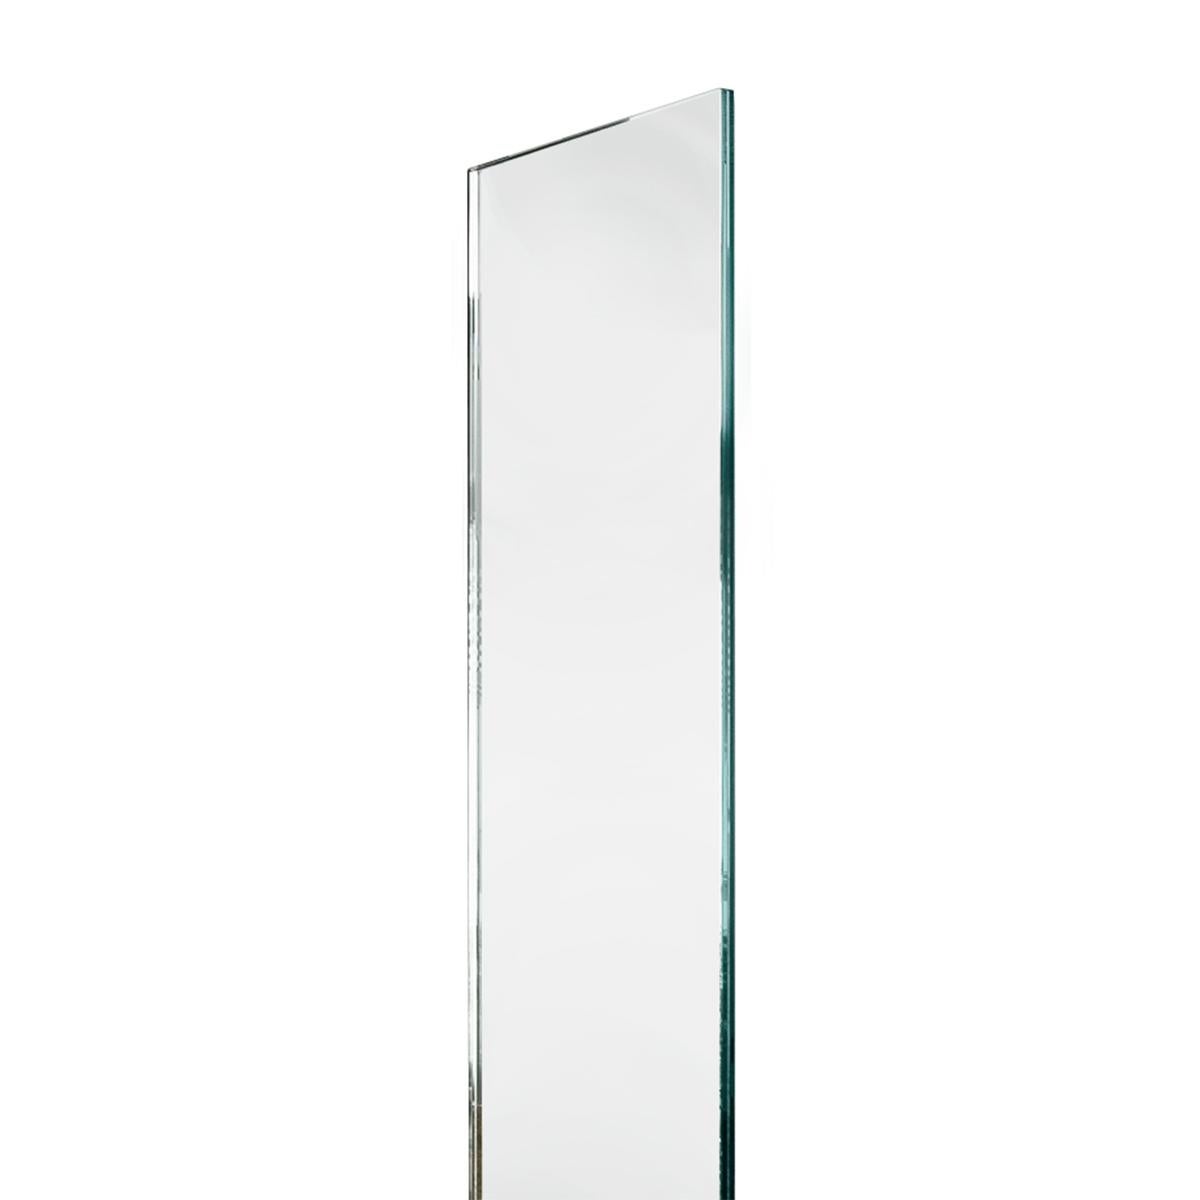 Mirror Angeles all in glass with double
sided mirror glass. On swivel base.